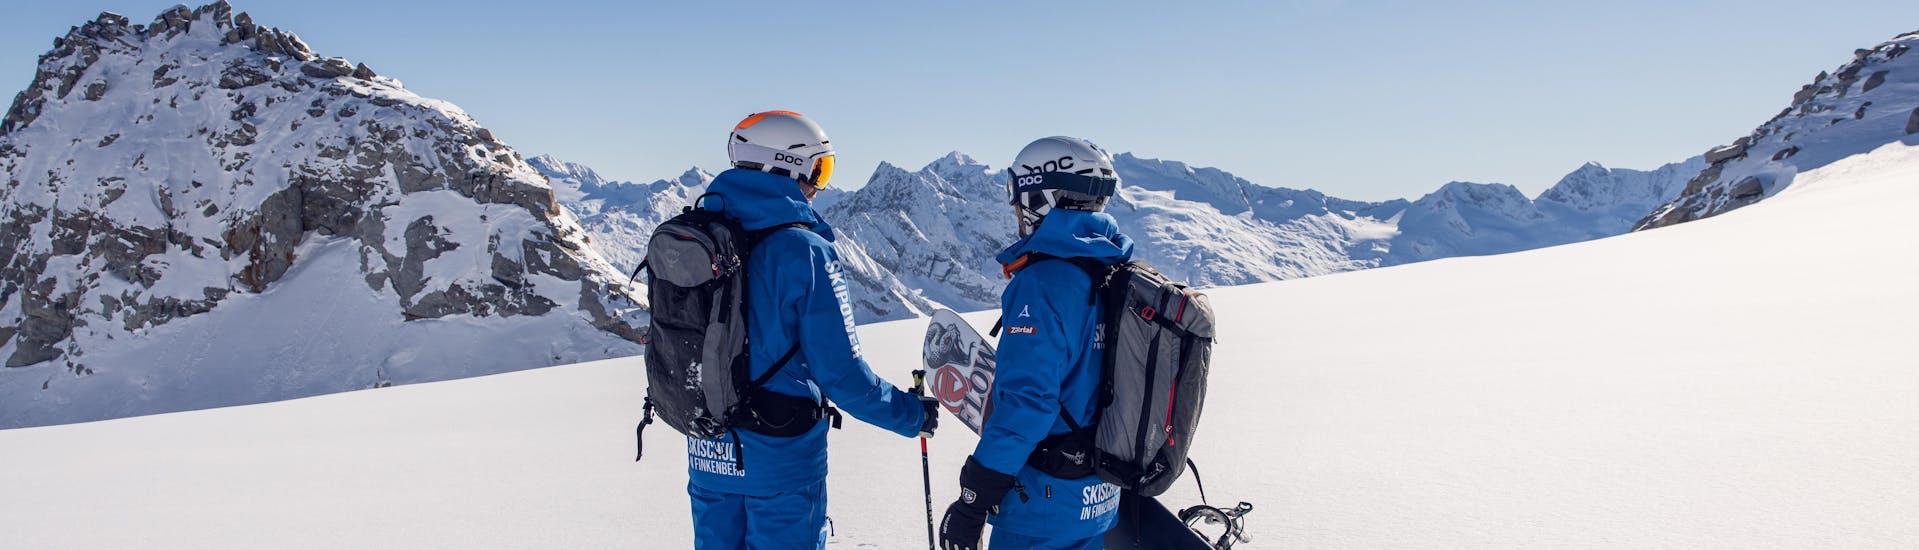 A skier and a snowboarder enjoy the view during their private ski tour with the Skipower Finkenberg ski school.